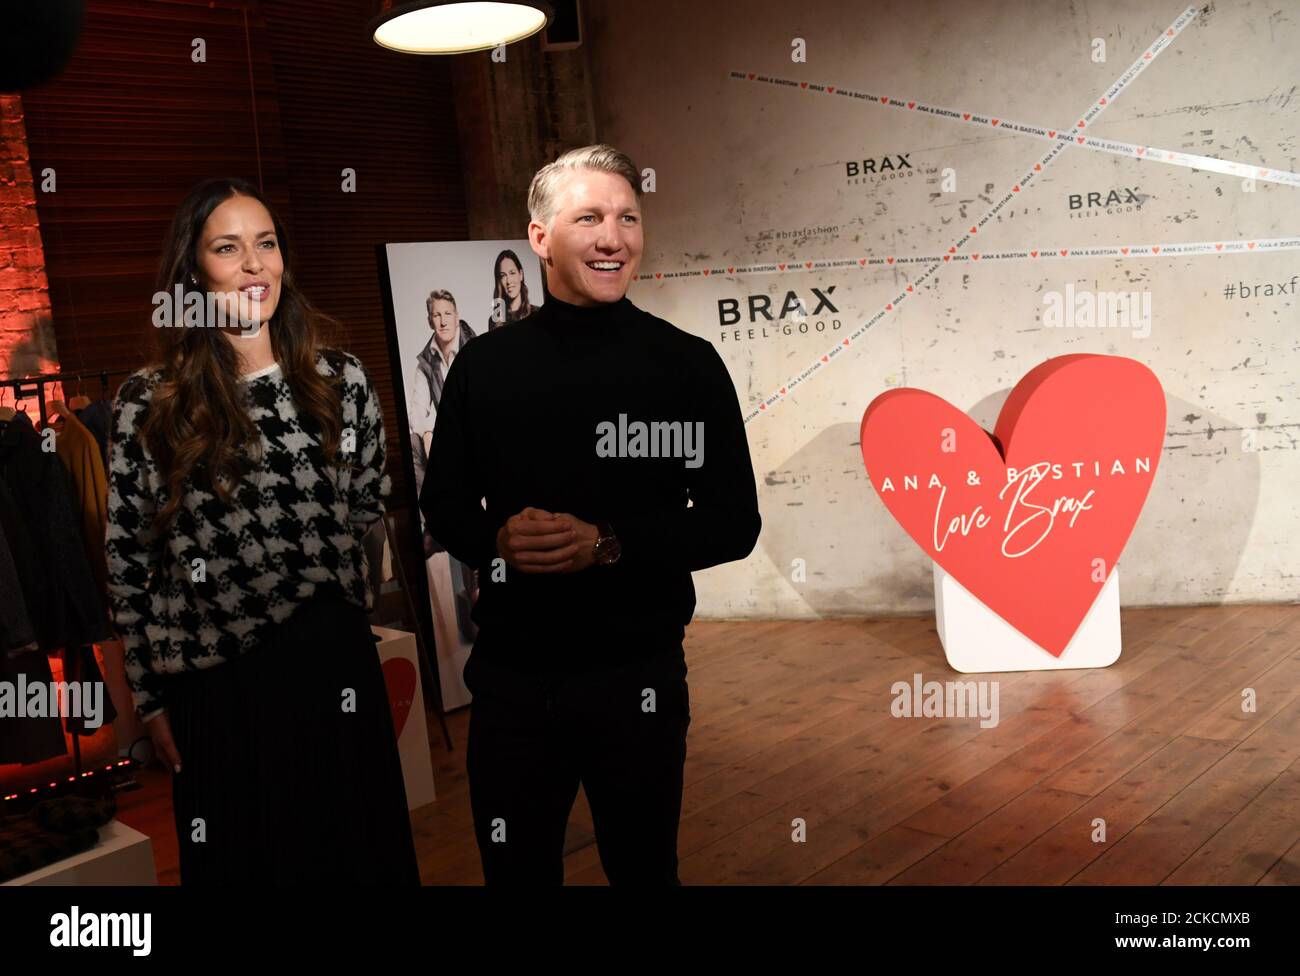 Ana Ivanovic and Bastian Schweinsteiger attend an interview with Reuters  during a presentation of a fashion collection by Brax in Berlin, Germany,  January 14, 2020. REUTERS/Annegret Hilse Stock Photo - Alamy